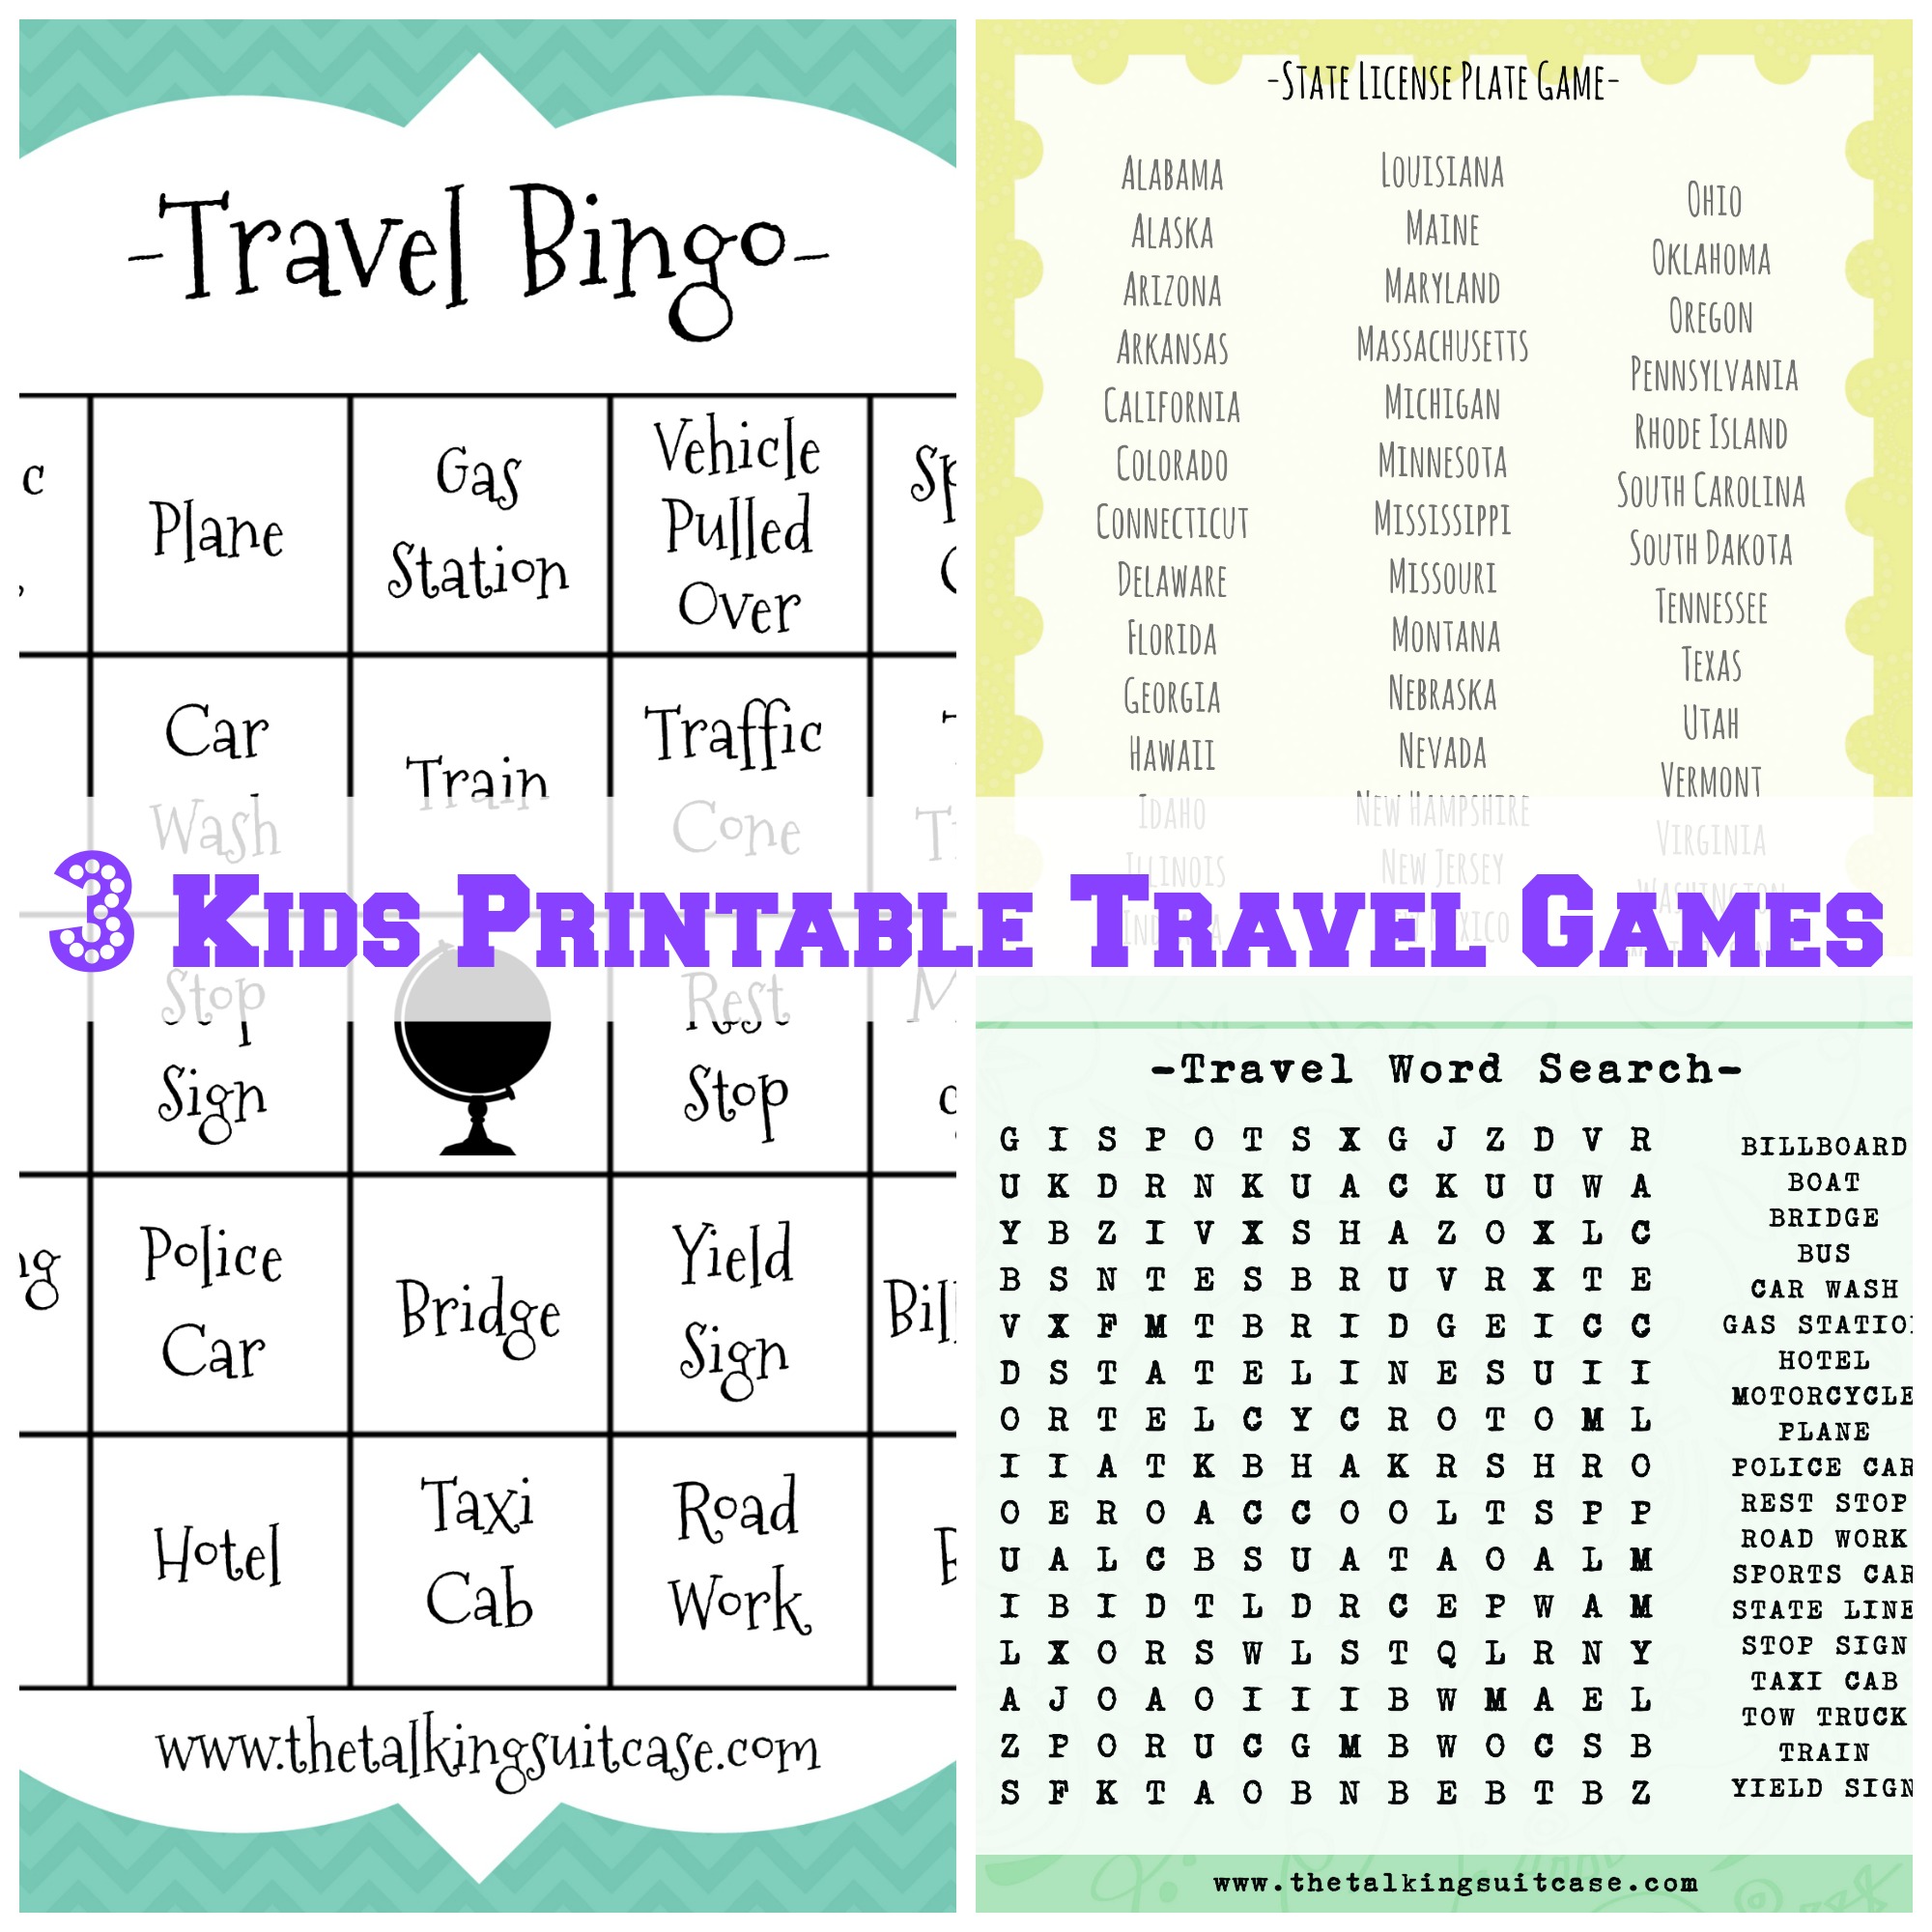 Free Printable Travel Games for Kids